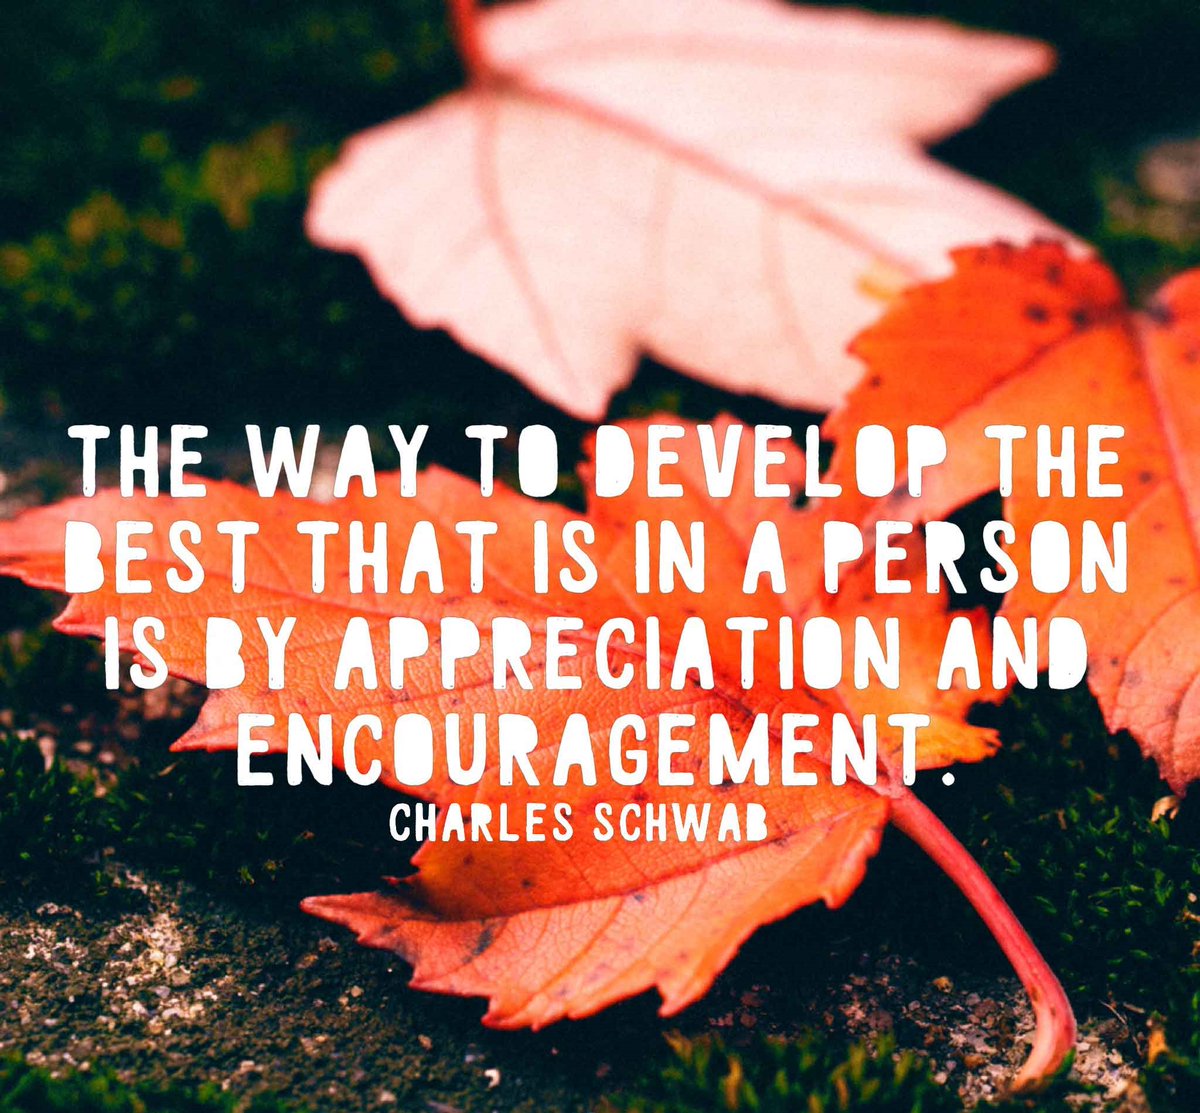 The way to develop the best that is in a person is by appreciation and encouragement. #ThursdayMotivation #ThursdayThoughts #Appreciation #Encouragement